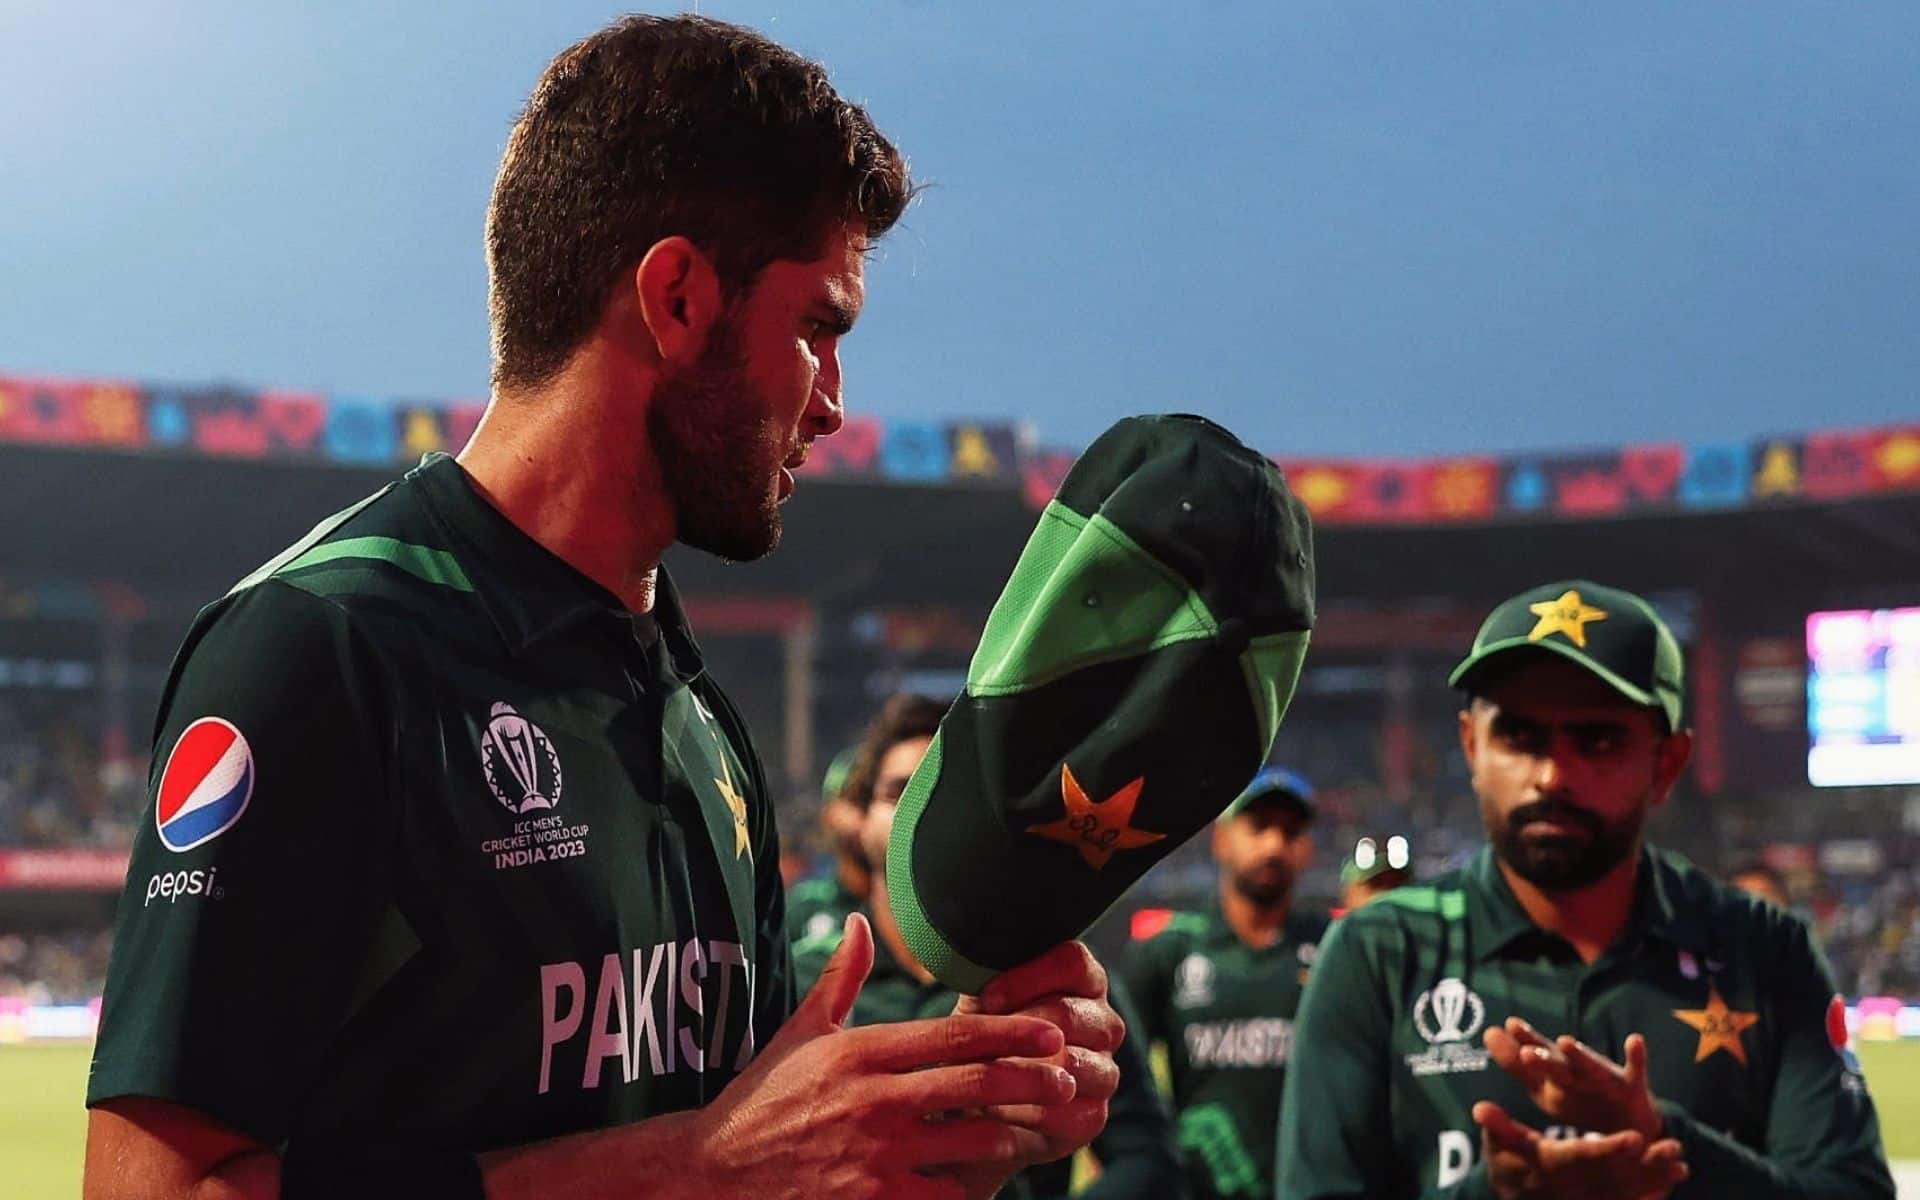 Shaheen Afridi's T20I captaincy stint lasted for few months (x.com)